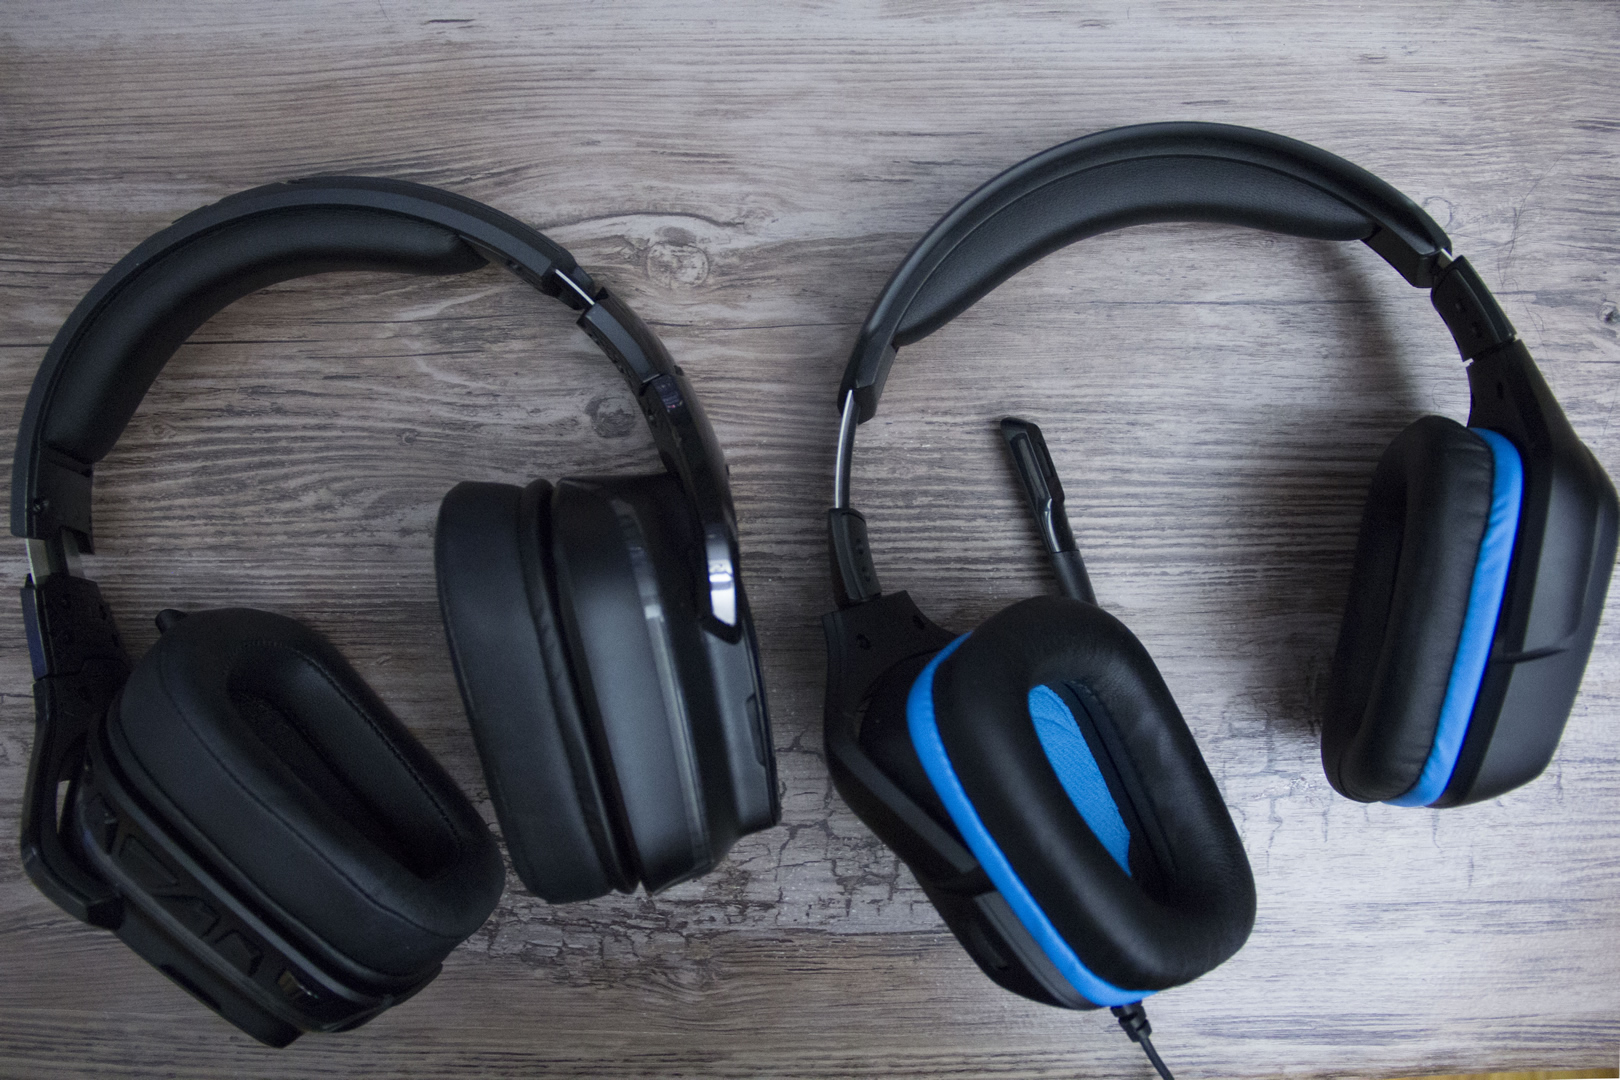 Logitech and Review: Great Gaming Headsets With Flaws | Digital